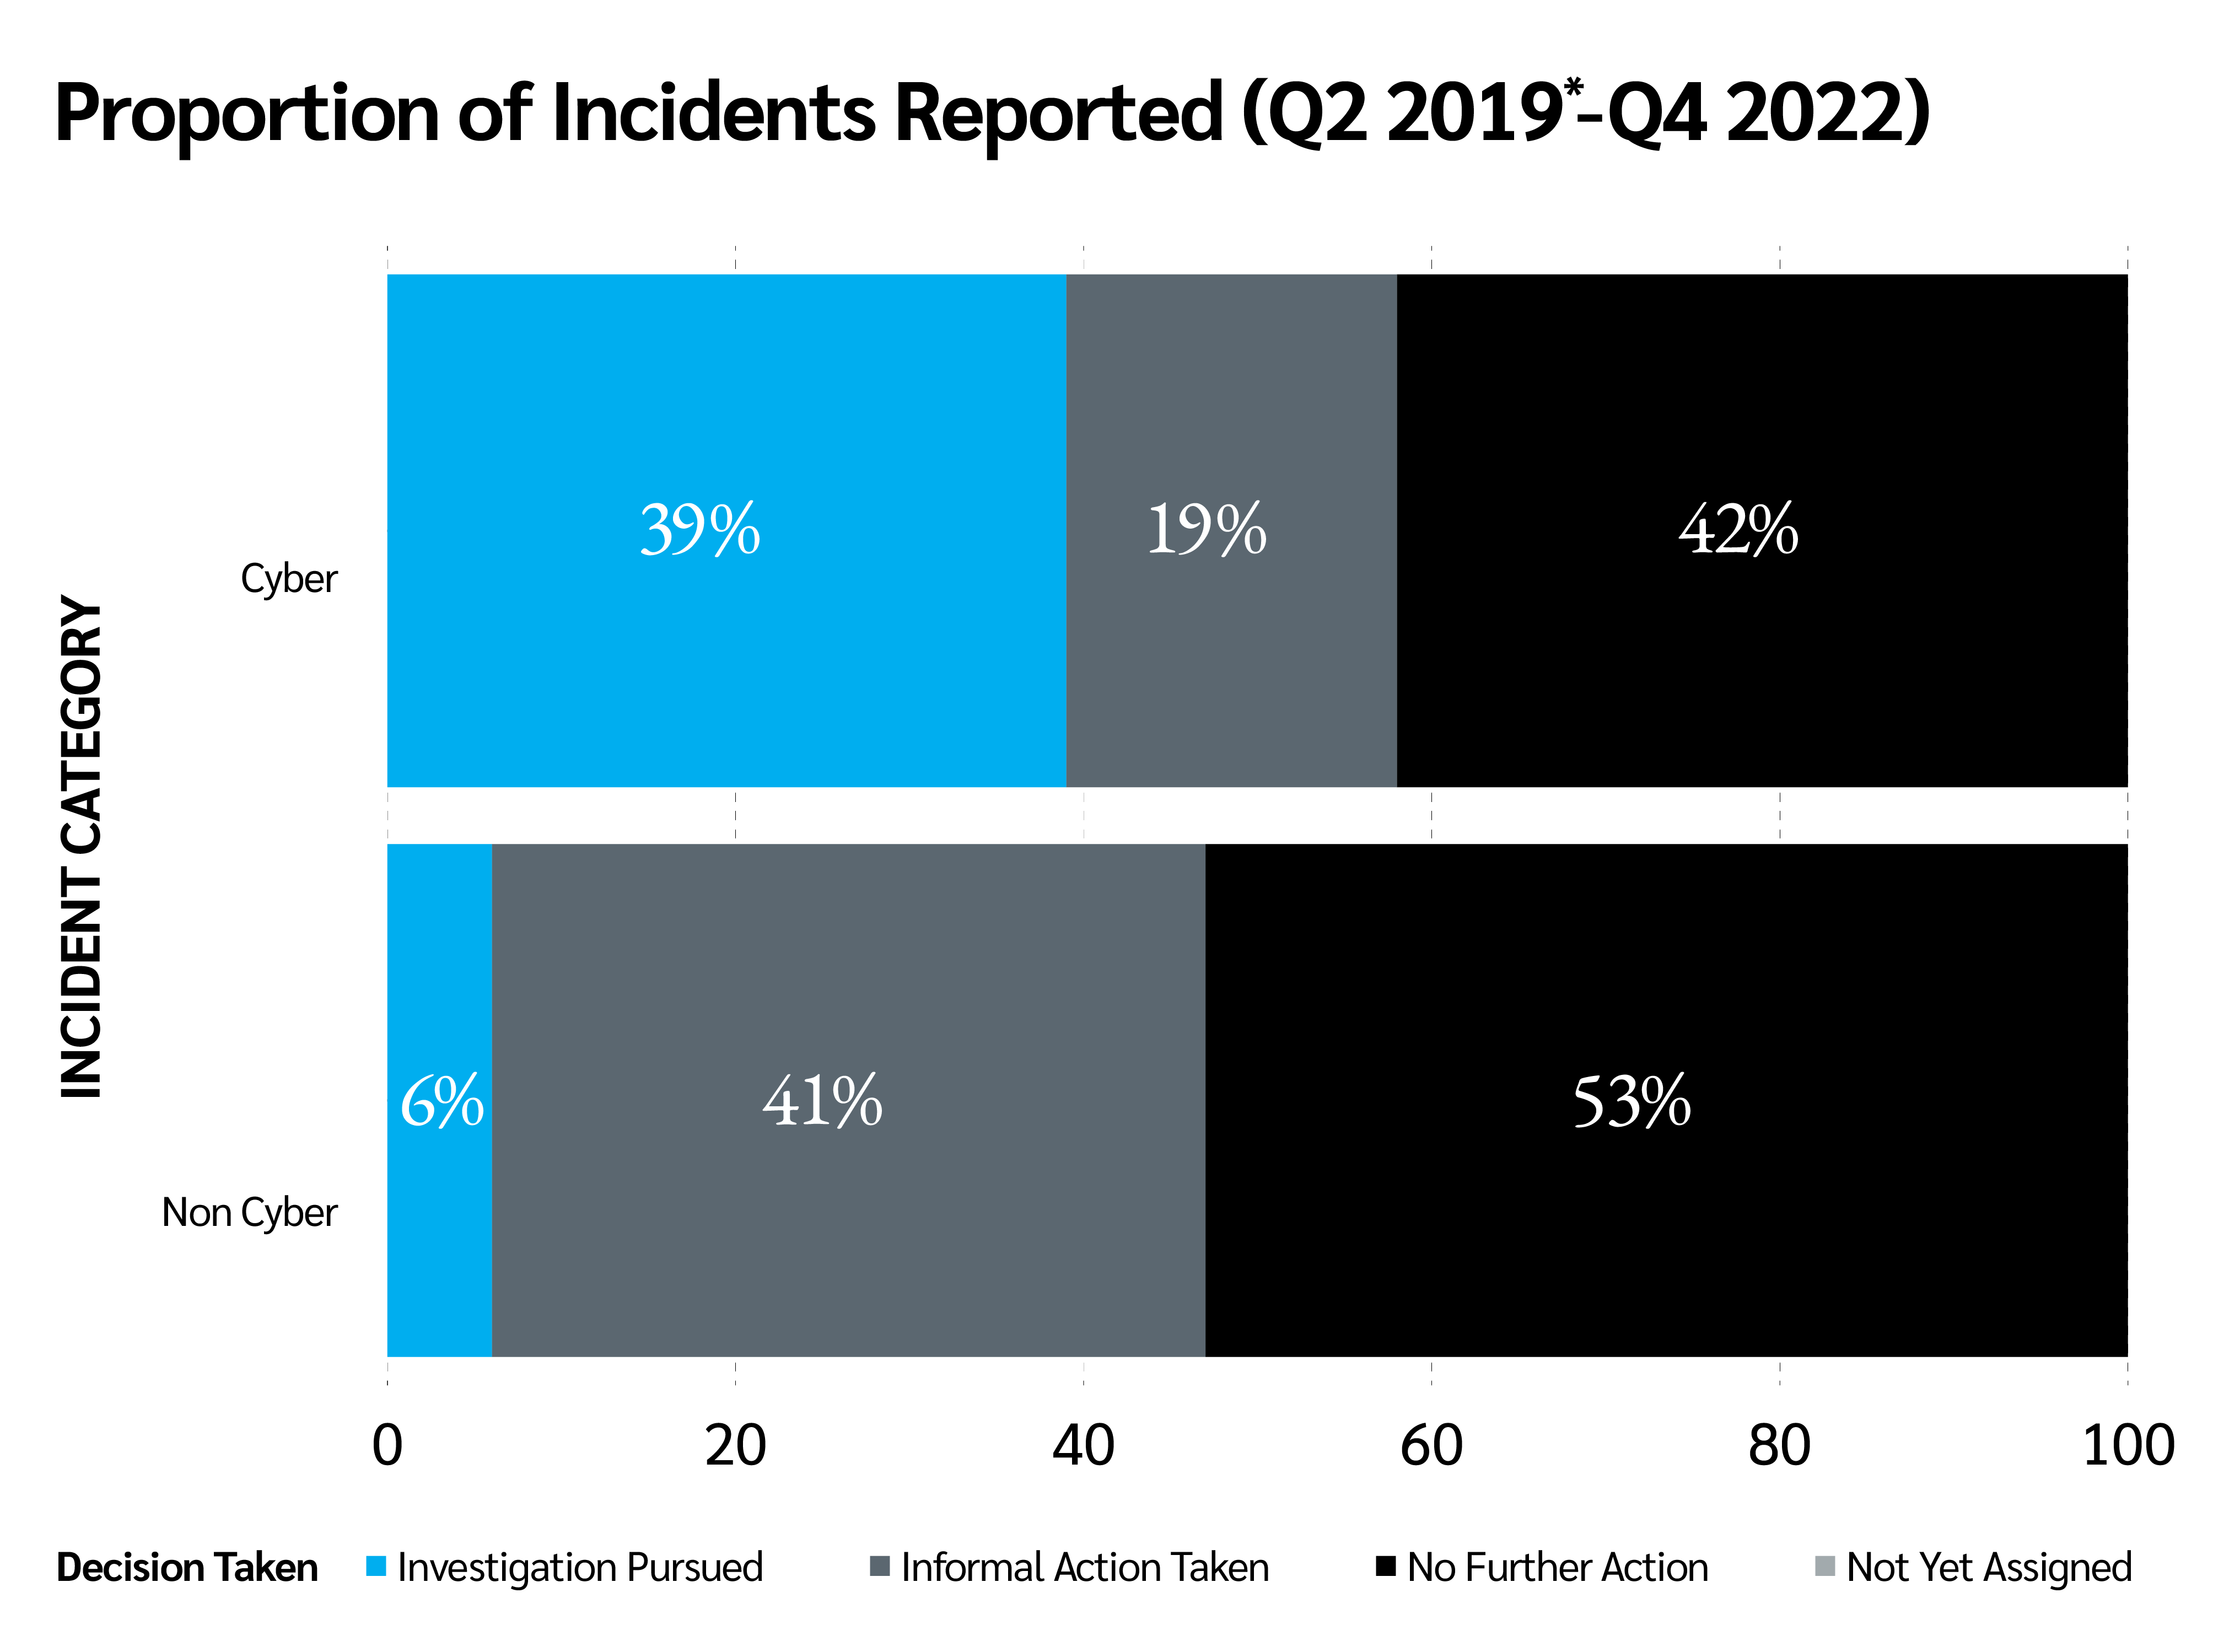 Proprtion of Incidents Reported 2019-2022; Source: ICO